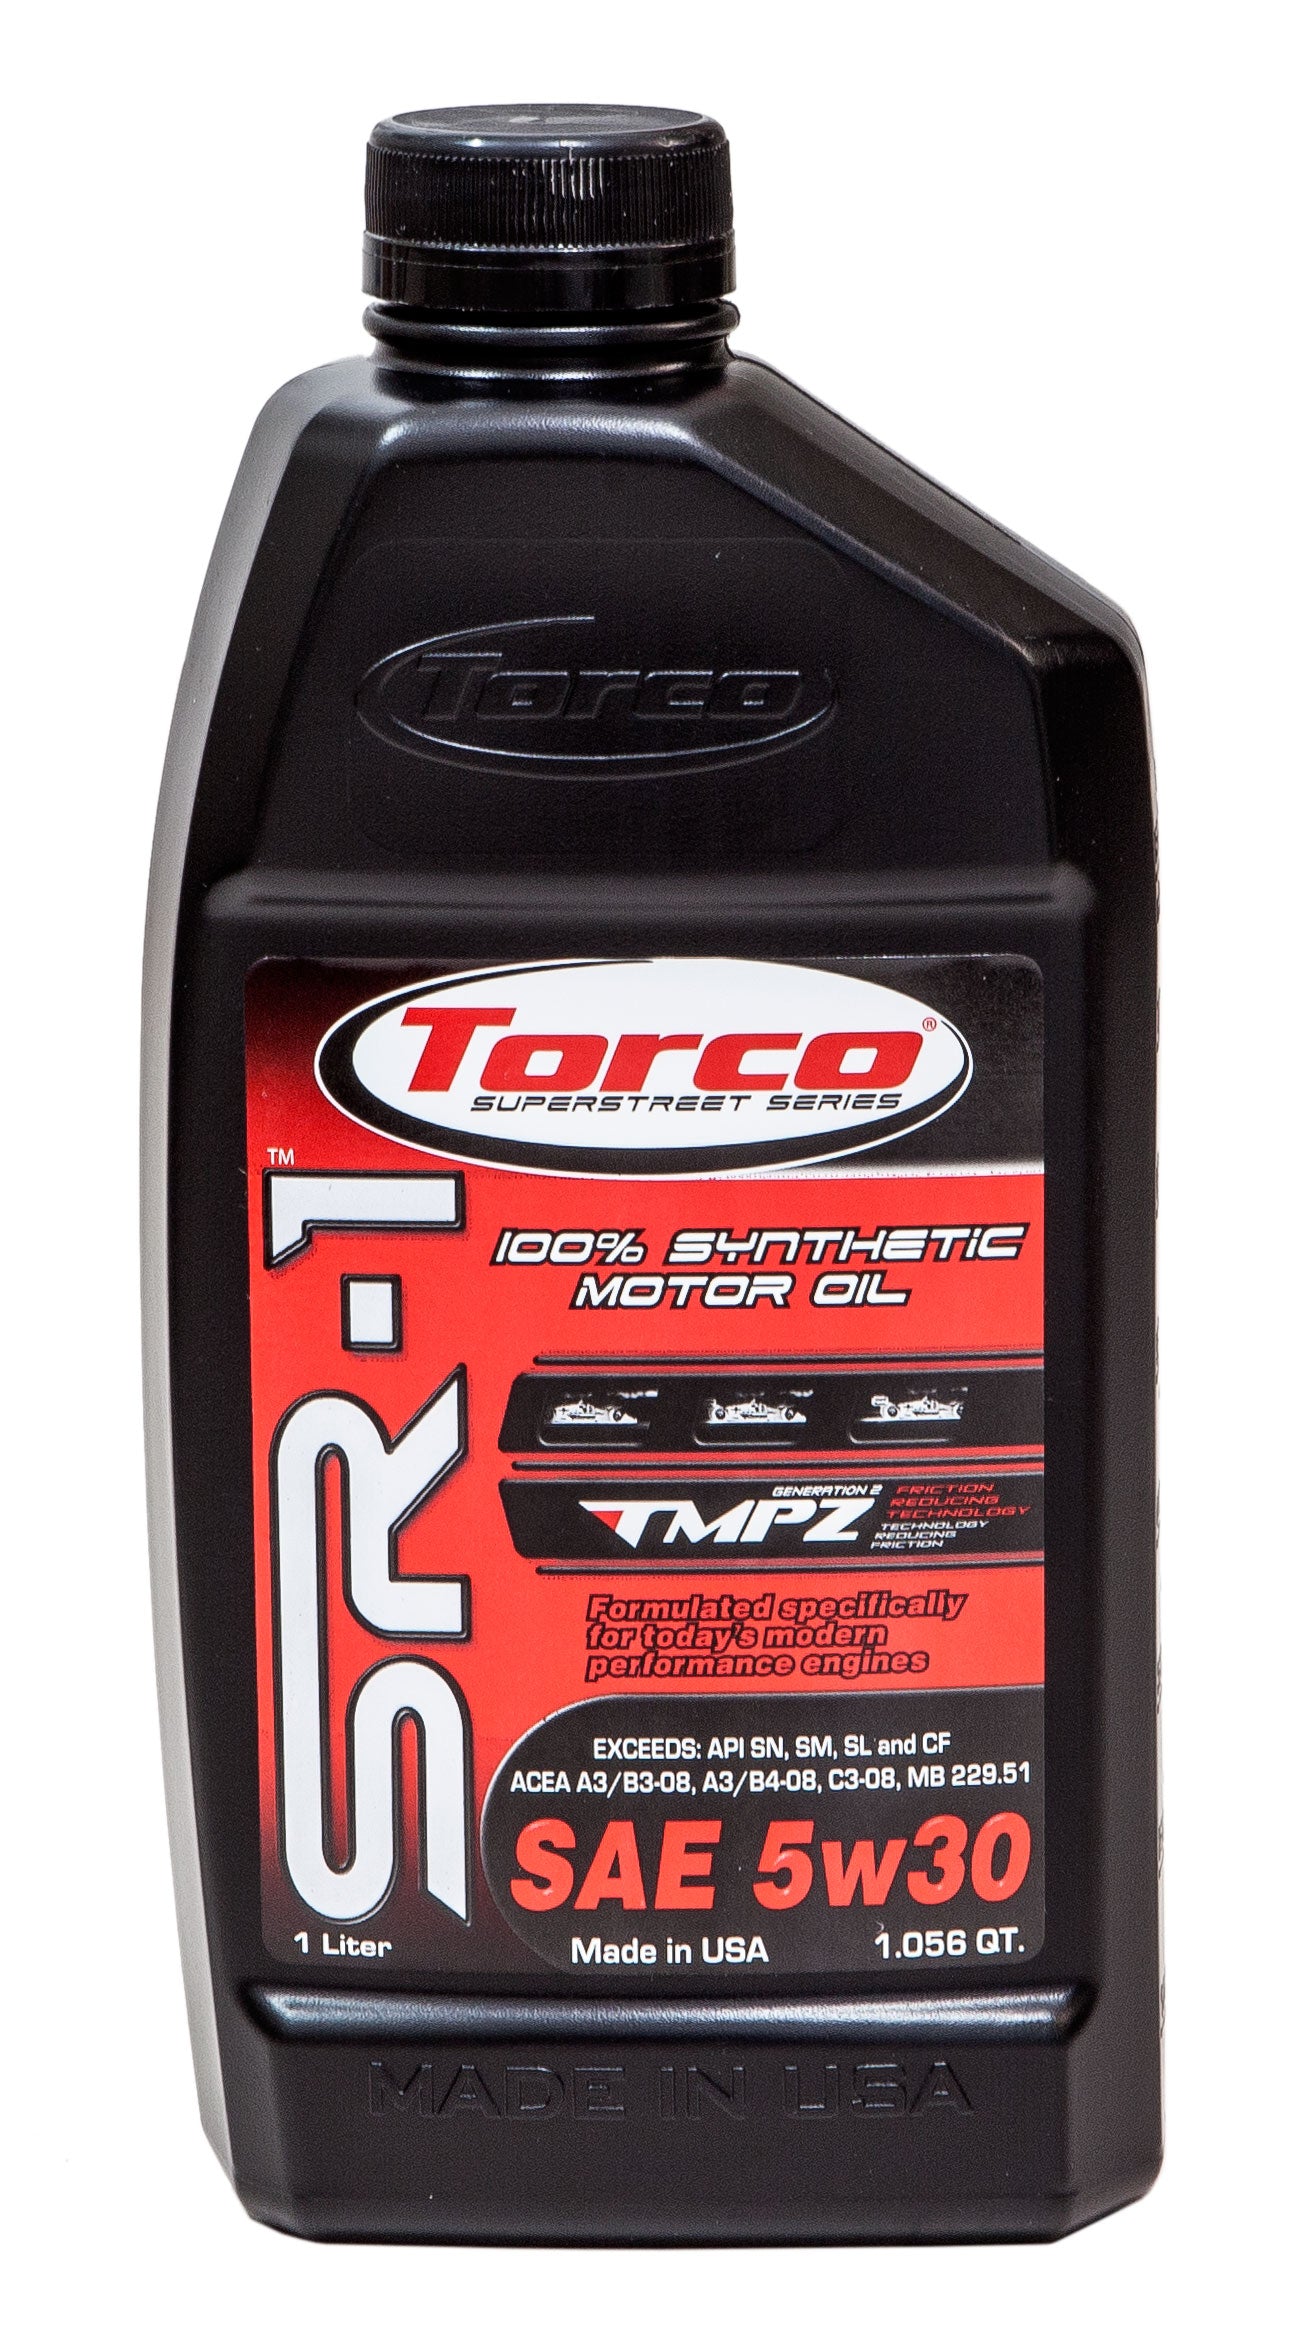 Torco Performance Oil 5w30